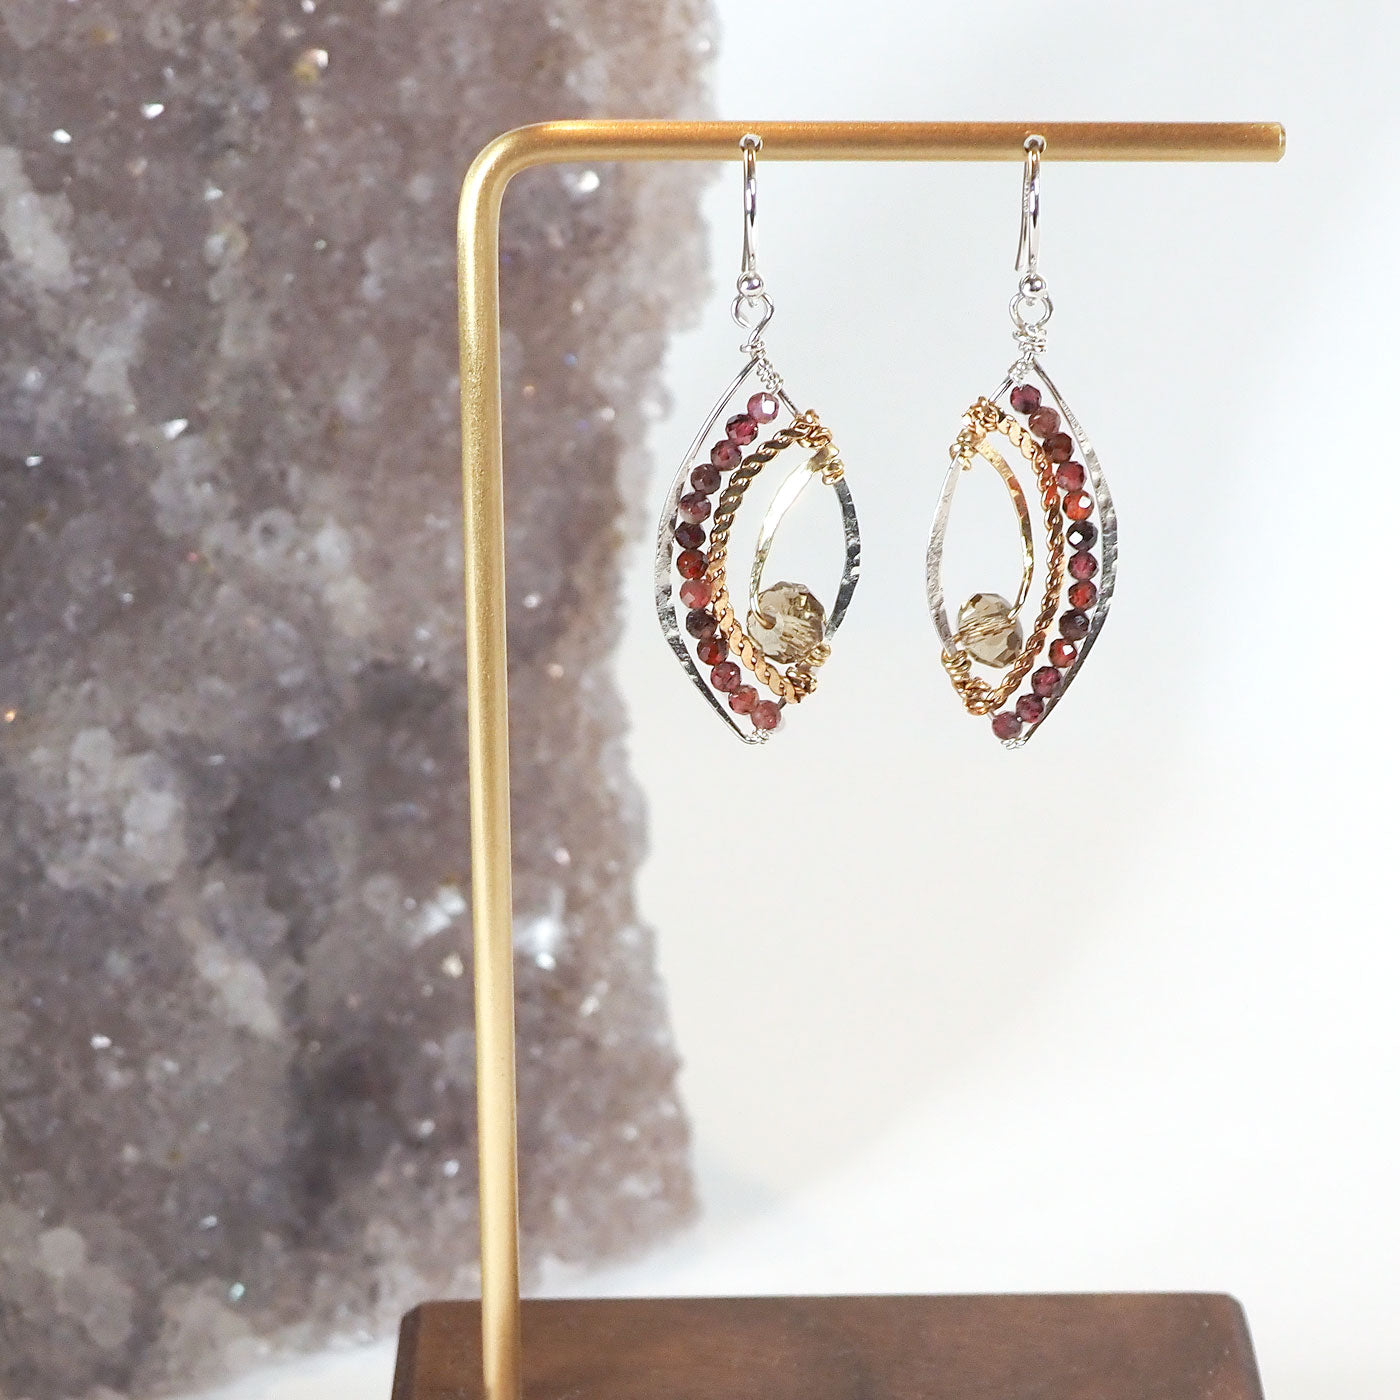 Faceted garnet gemstones lines the wings of these sterling silver earrings, accented by brass and crystal elements with a sterling silver french hook.